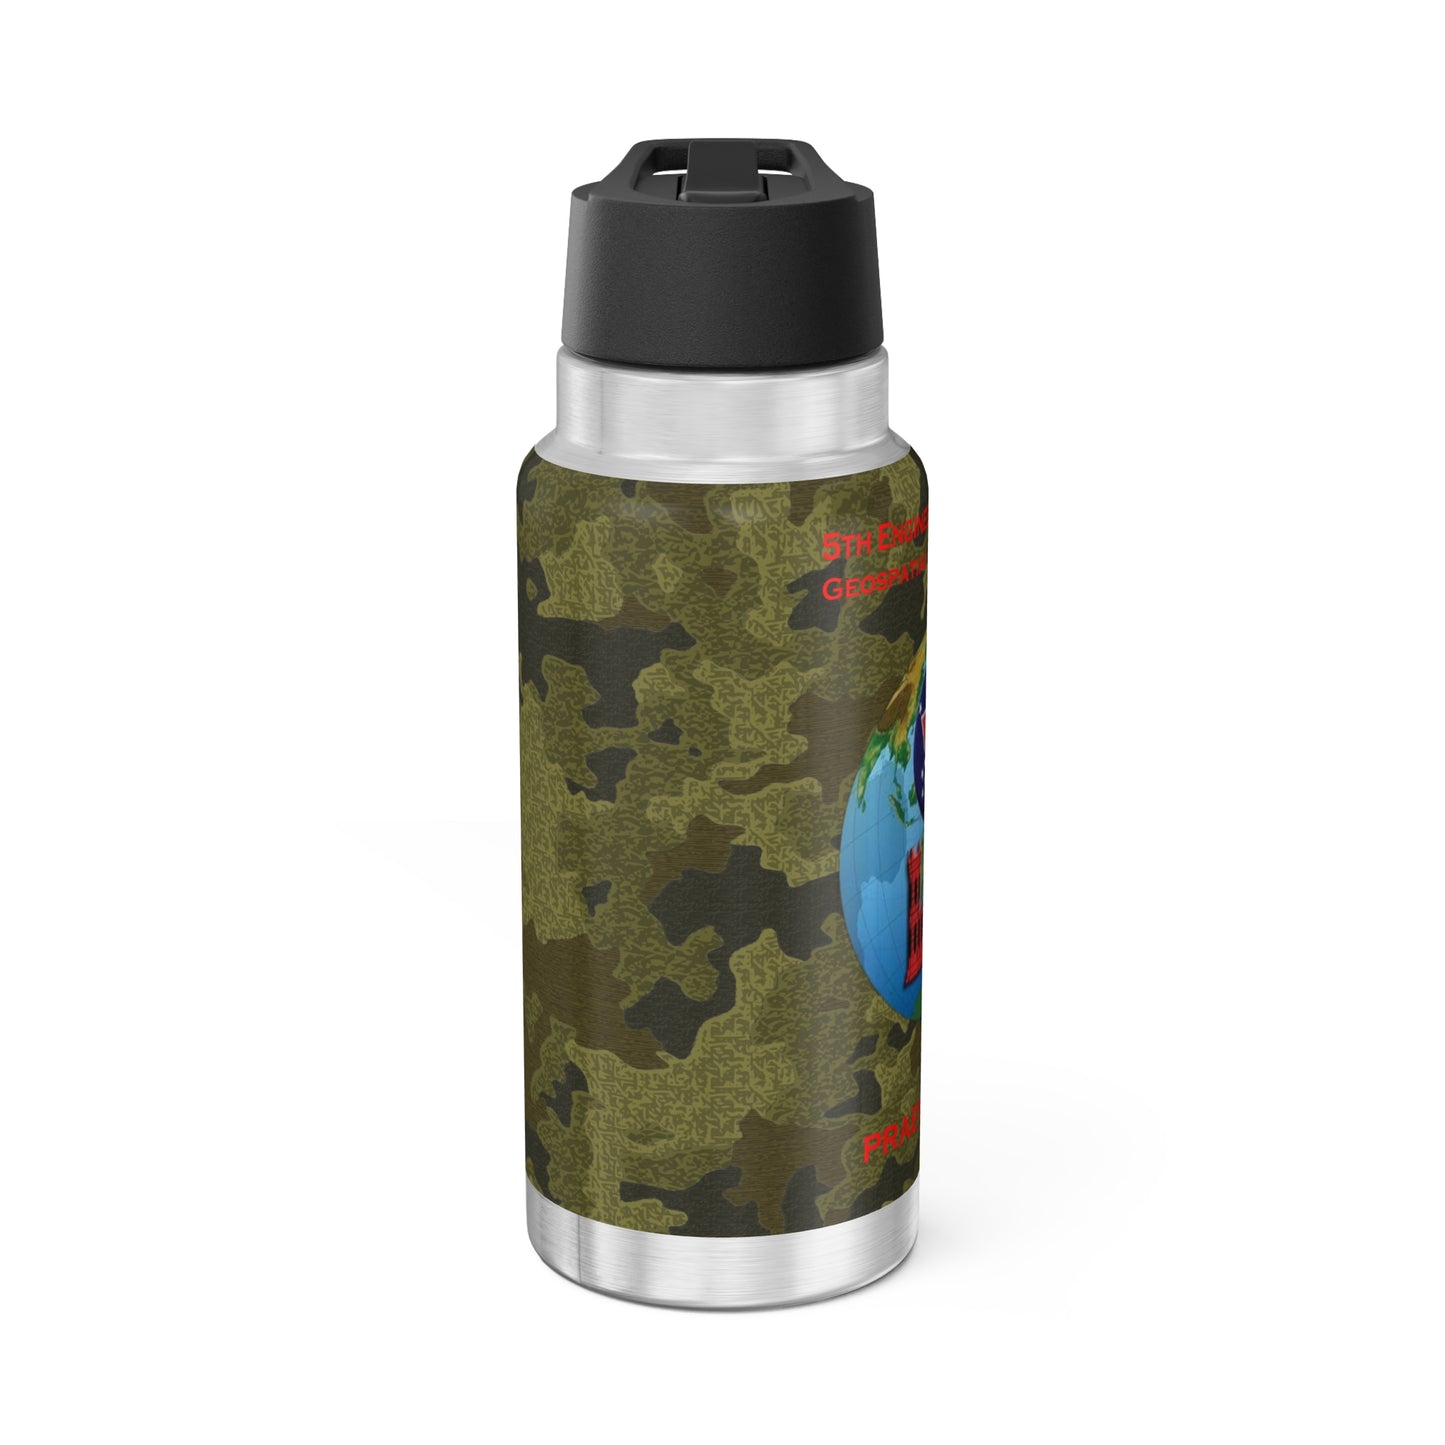 USARPAC, 5th Engineer Detachment, Geospatial Planning Cell Tiger Camo 32oz SteelGator